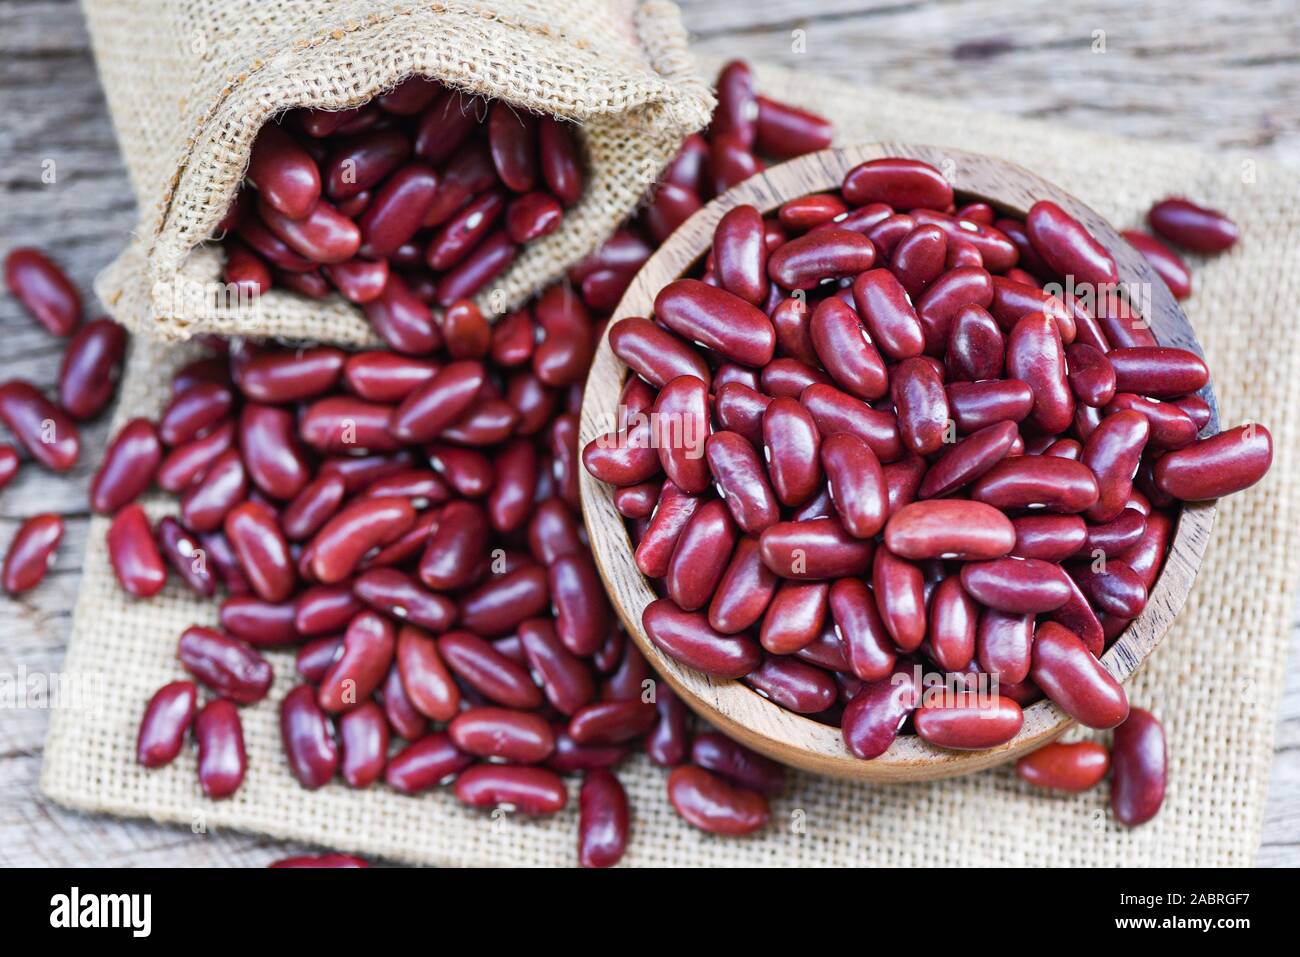 Red bean in wooden bowl on sack background / Grains red kidney beans , top view Stock Photo